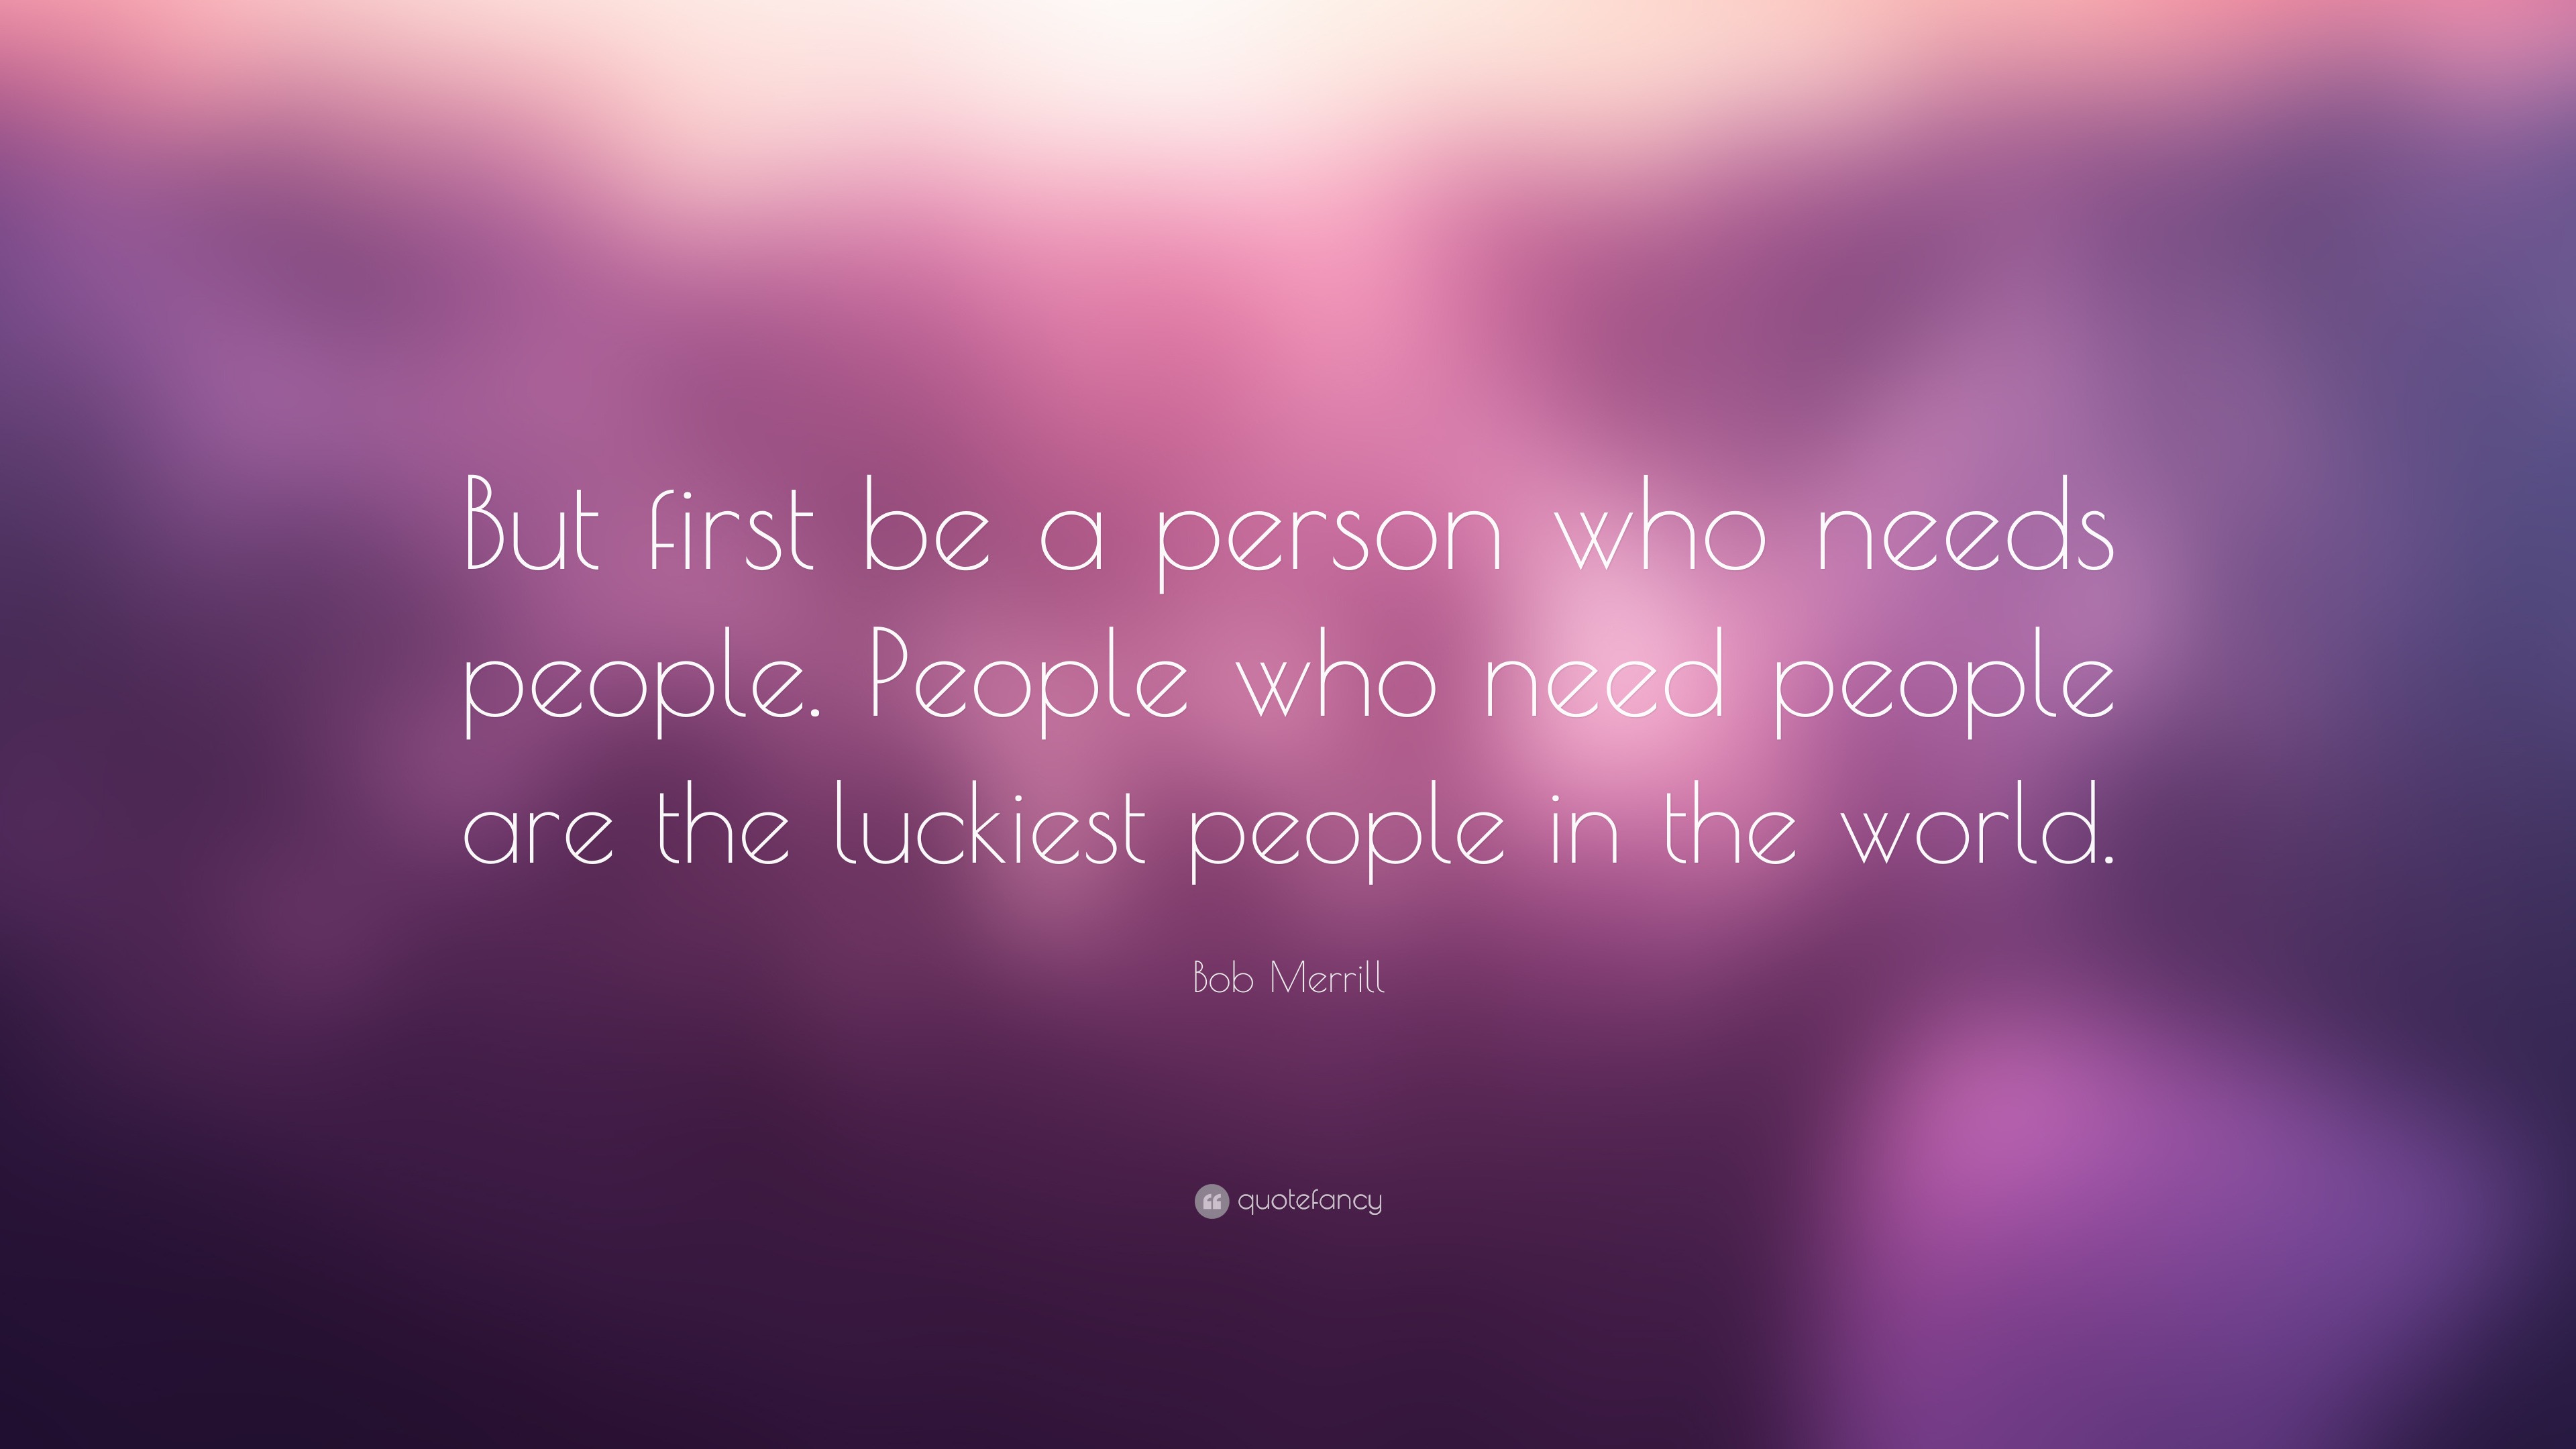 Bob Merrill Quote: “But first be a person who needs people. People who ...